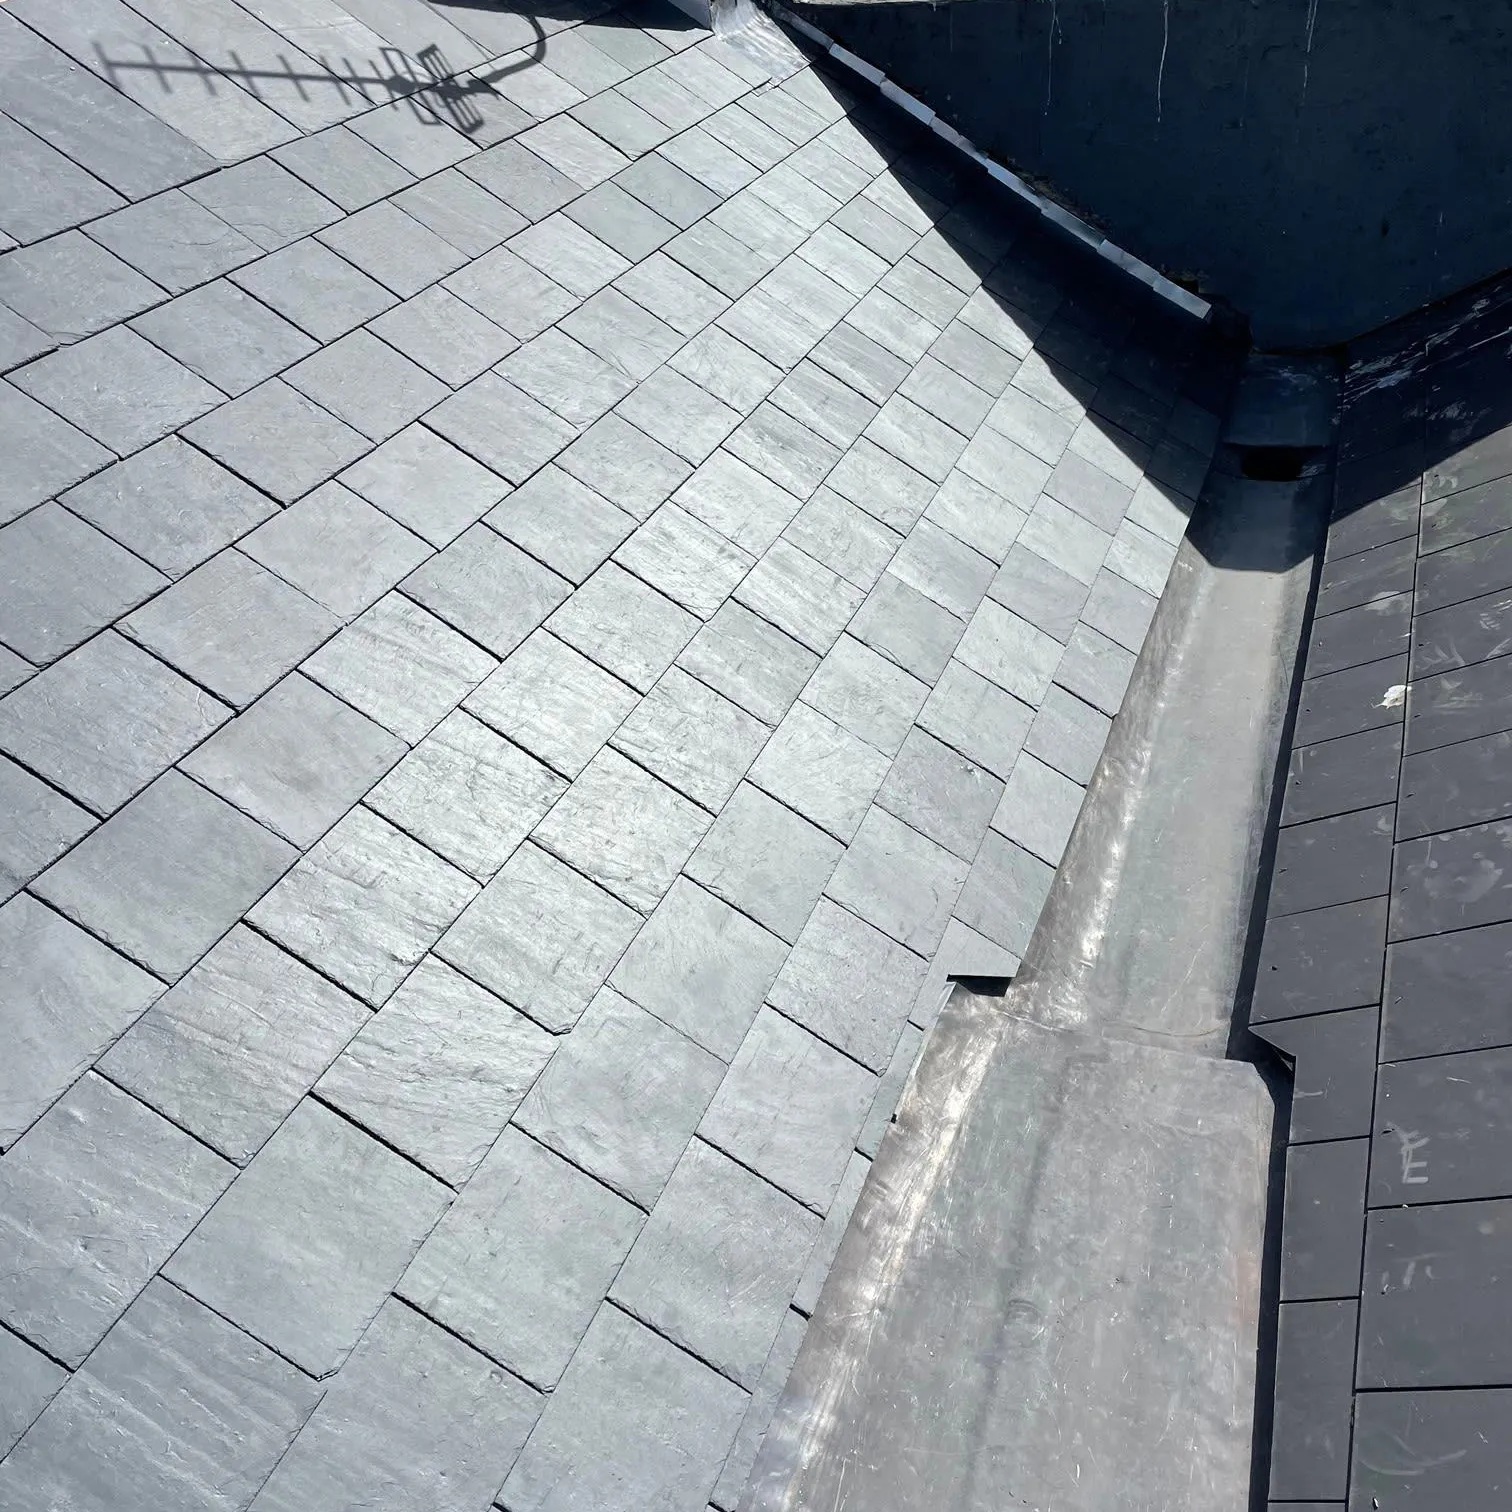 slate roof feeding into guttering system